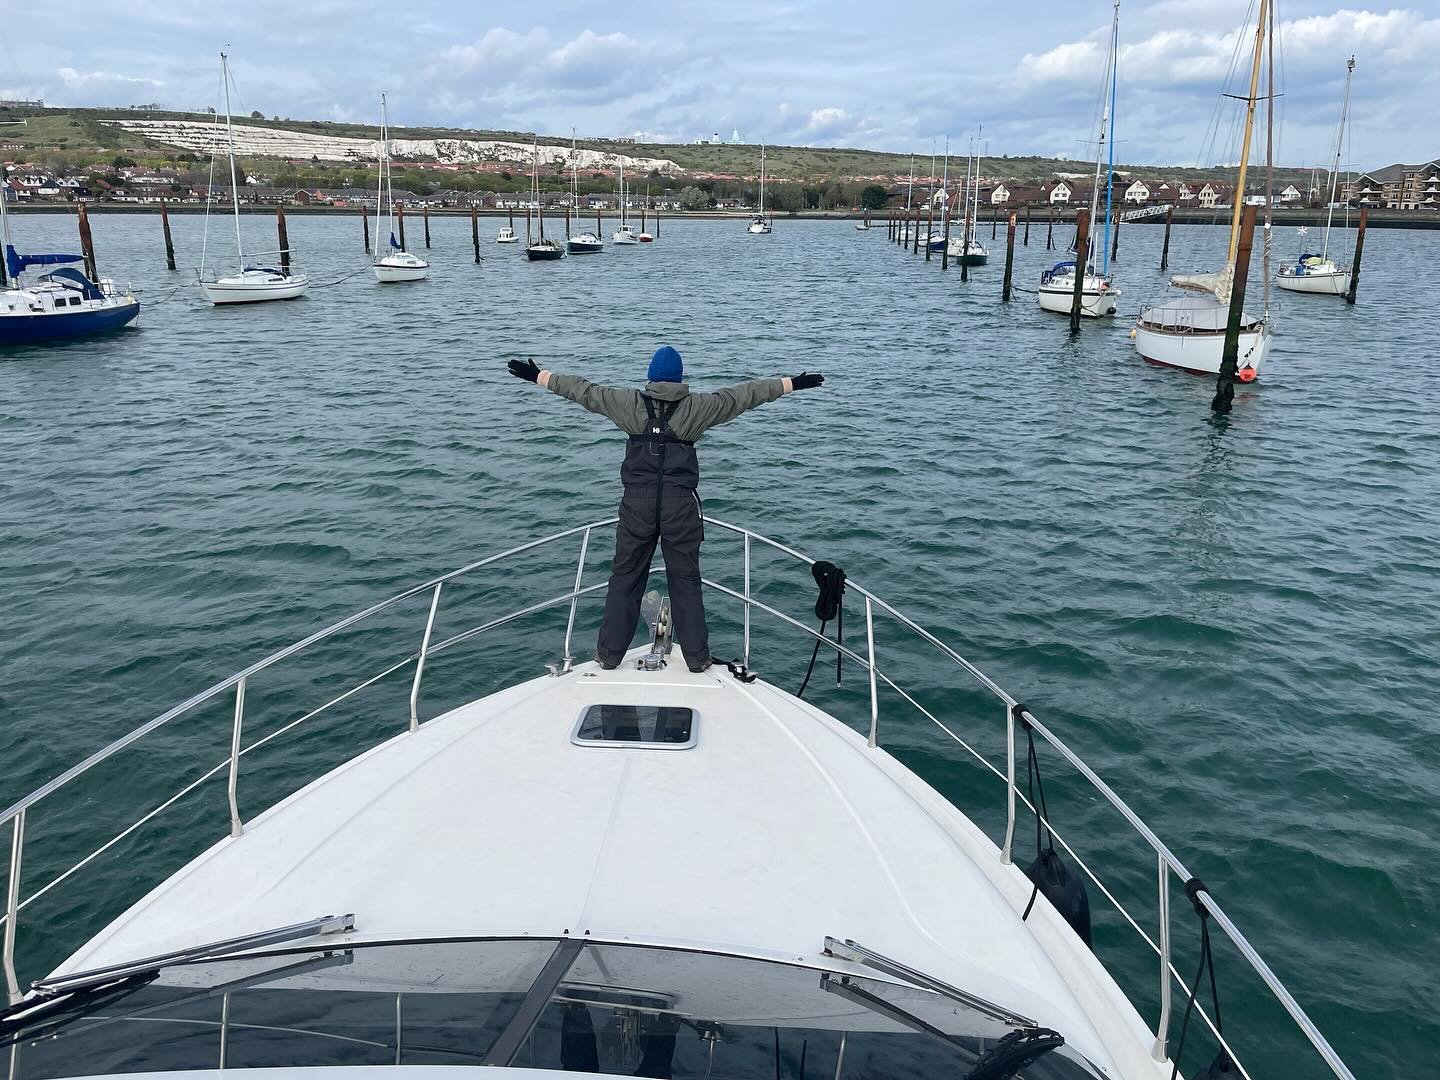 Good morning all 😎

Here&rsquo;s a list of my upcoming courses. Please PM me if you want more details how to book&hellip;

22-26th April - Day Skipper Theory (Chichester)

9th May - Introduction day at New Wave Boat Club in Poole if you fancied join